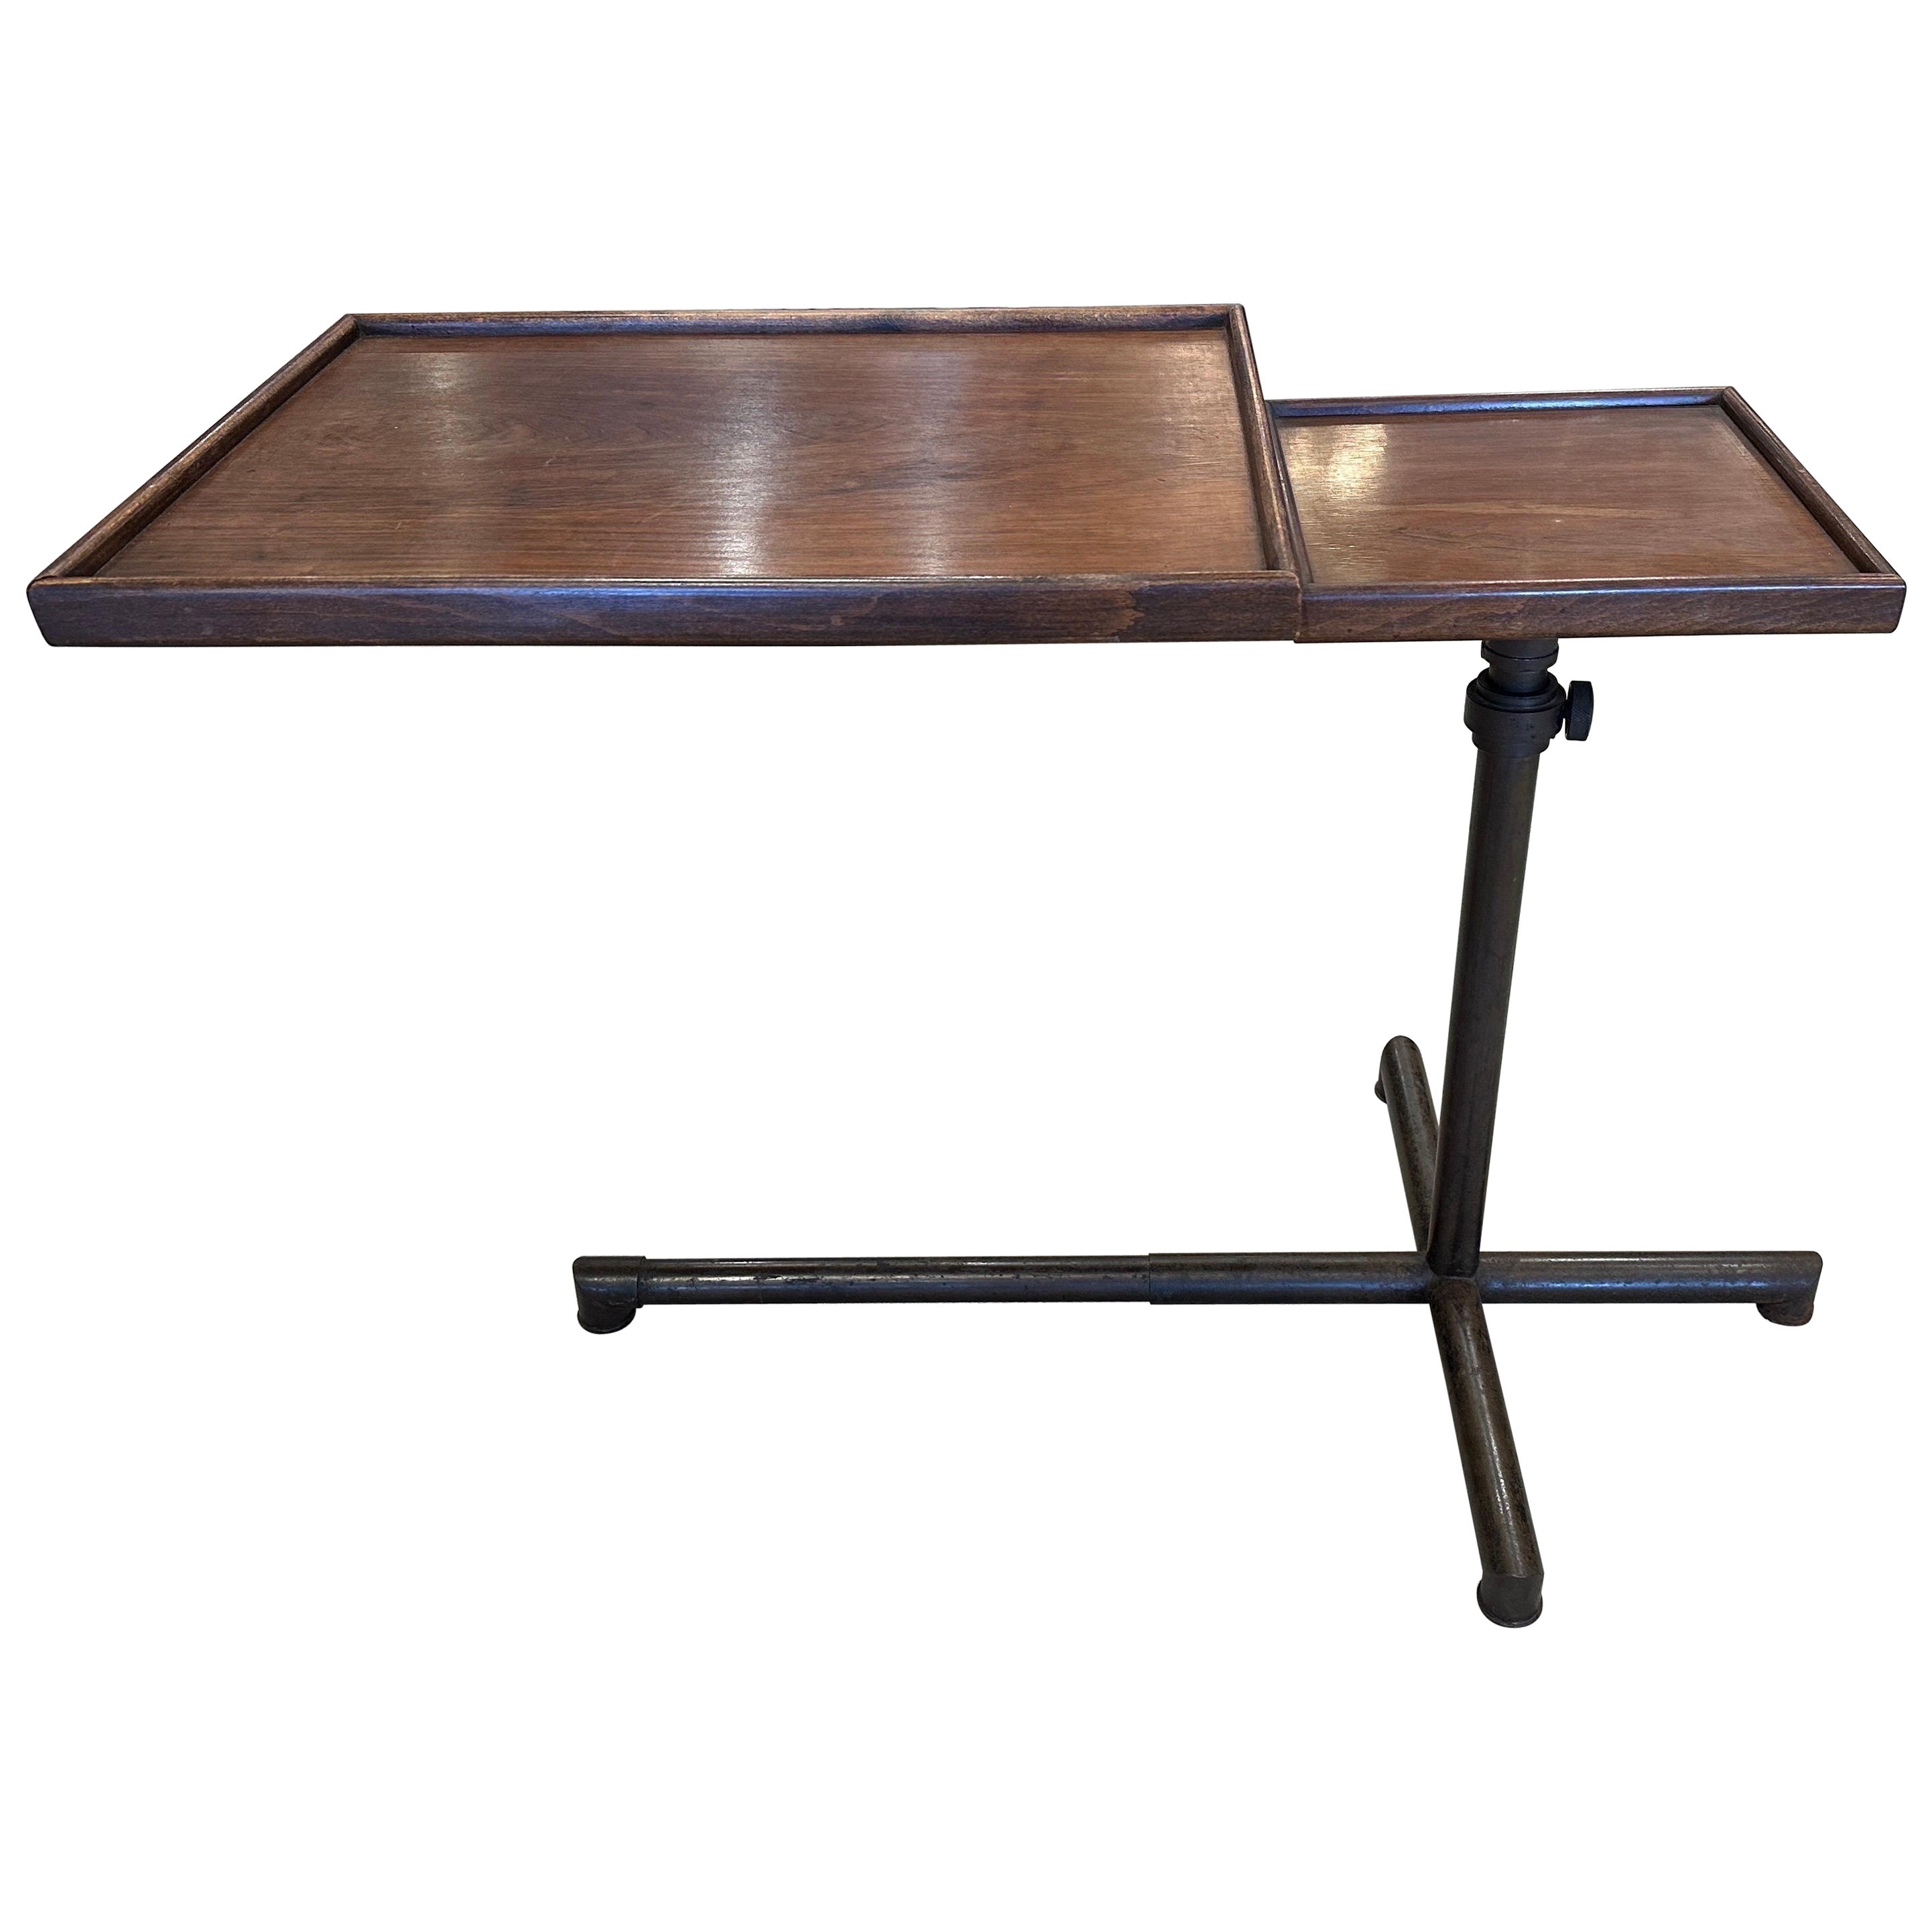 French Vintage Mechanical Deco Table For Sale at 1stDibs